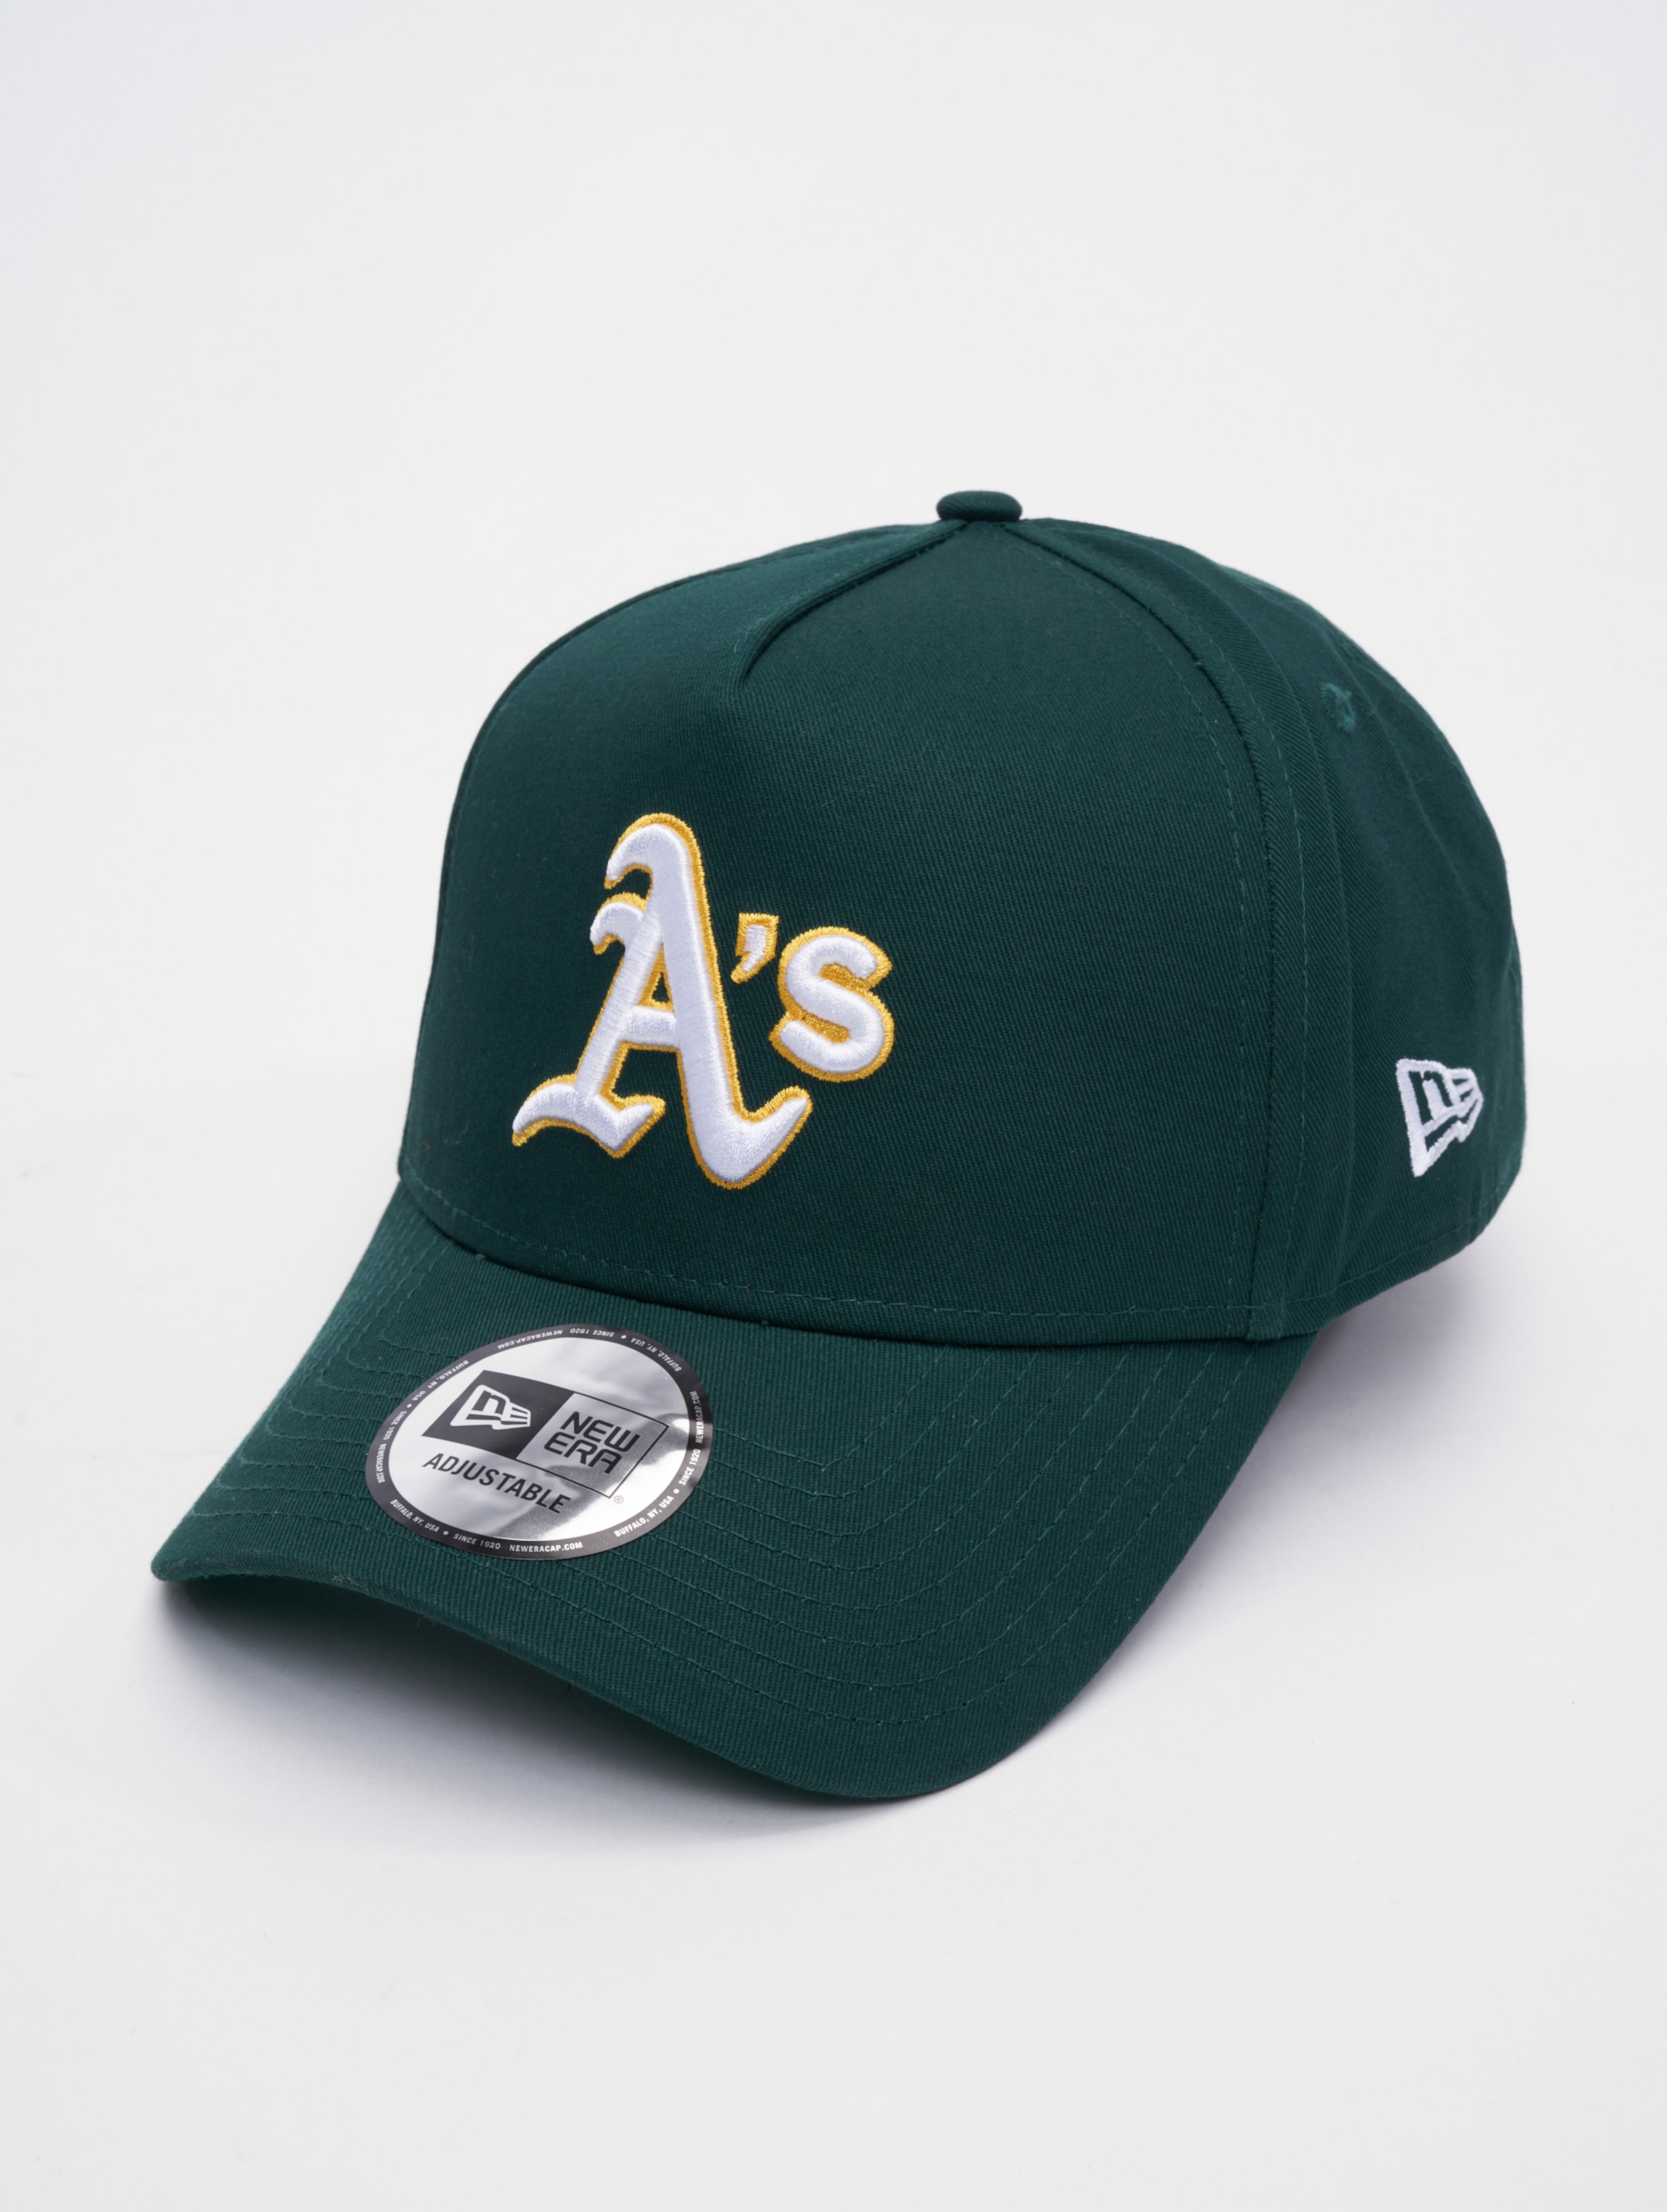 Oakland Athletics Cap - World Series Team Side Patch - LIMITED EDITION - 9Forty - One size - Green - New Era Caps - Pet Heren - Pet Dames - Petten